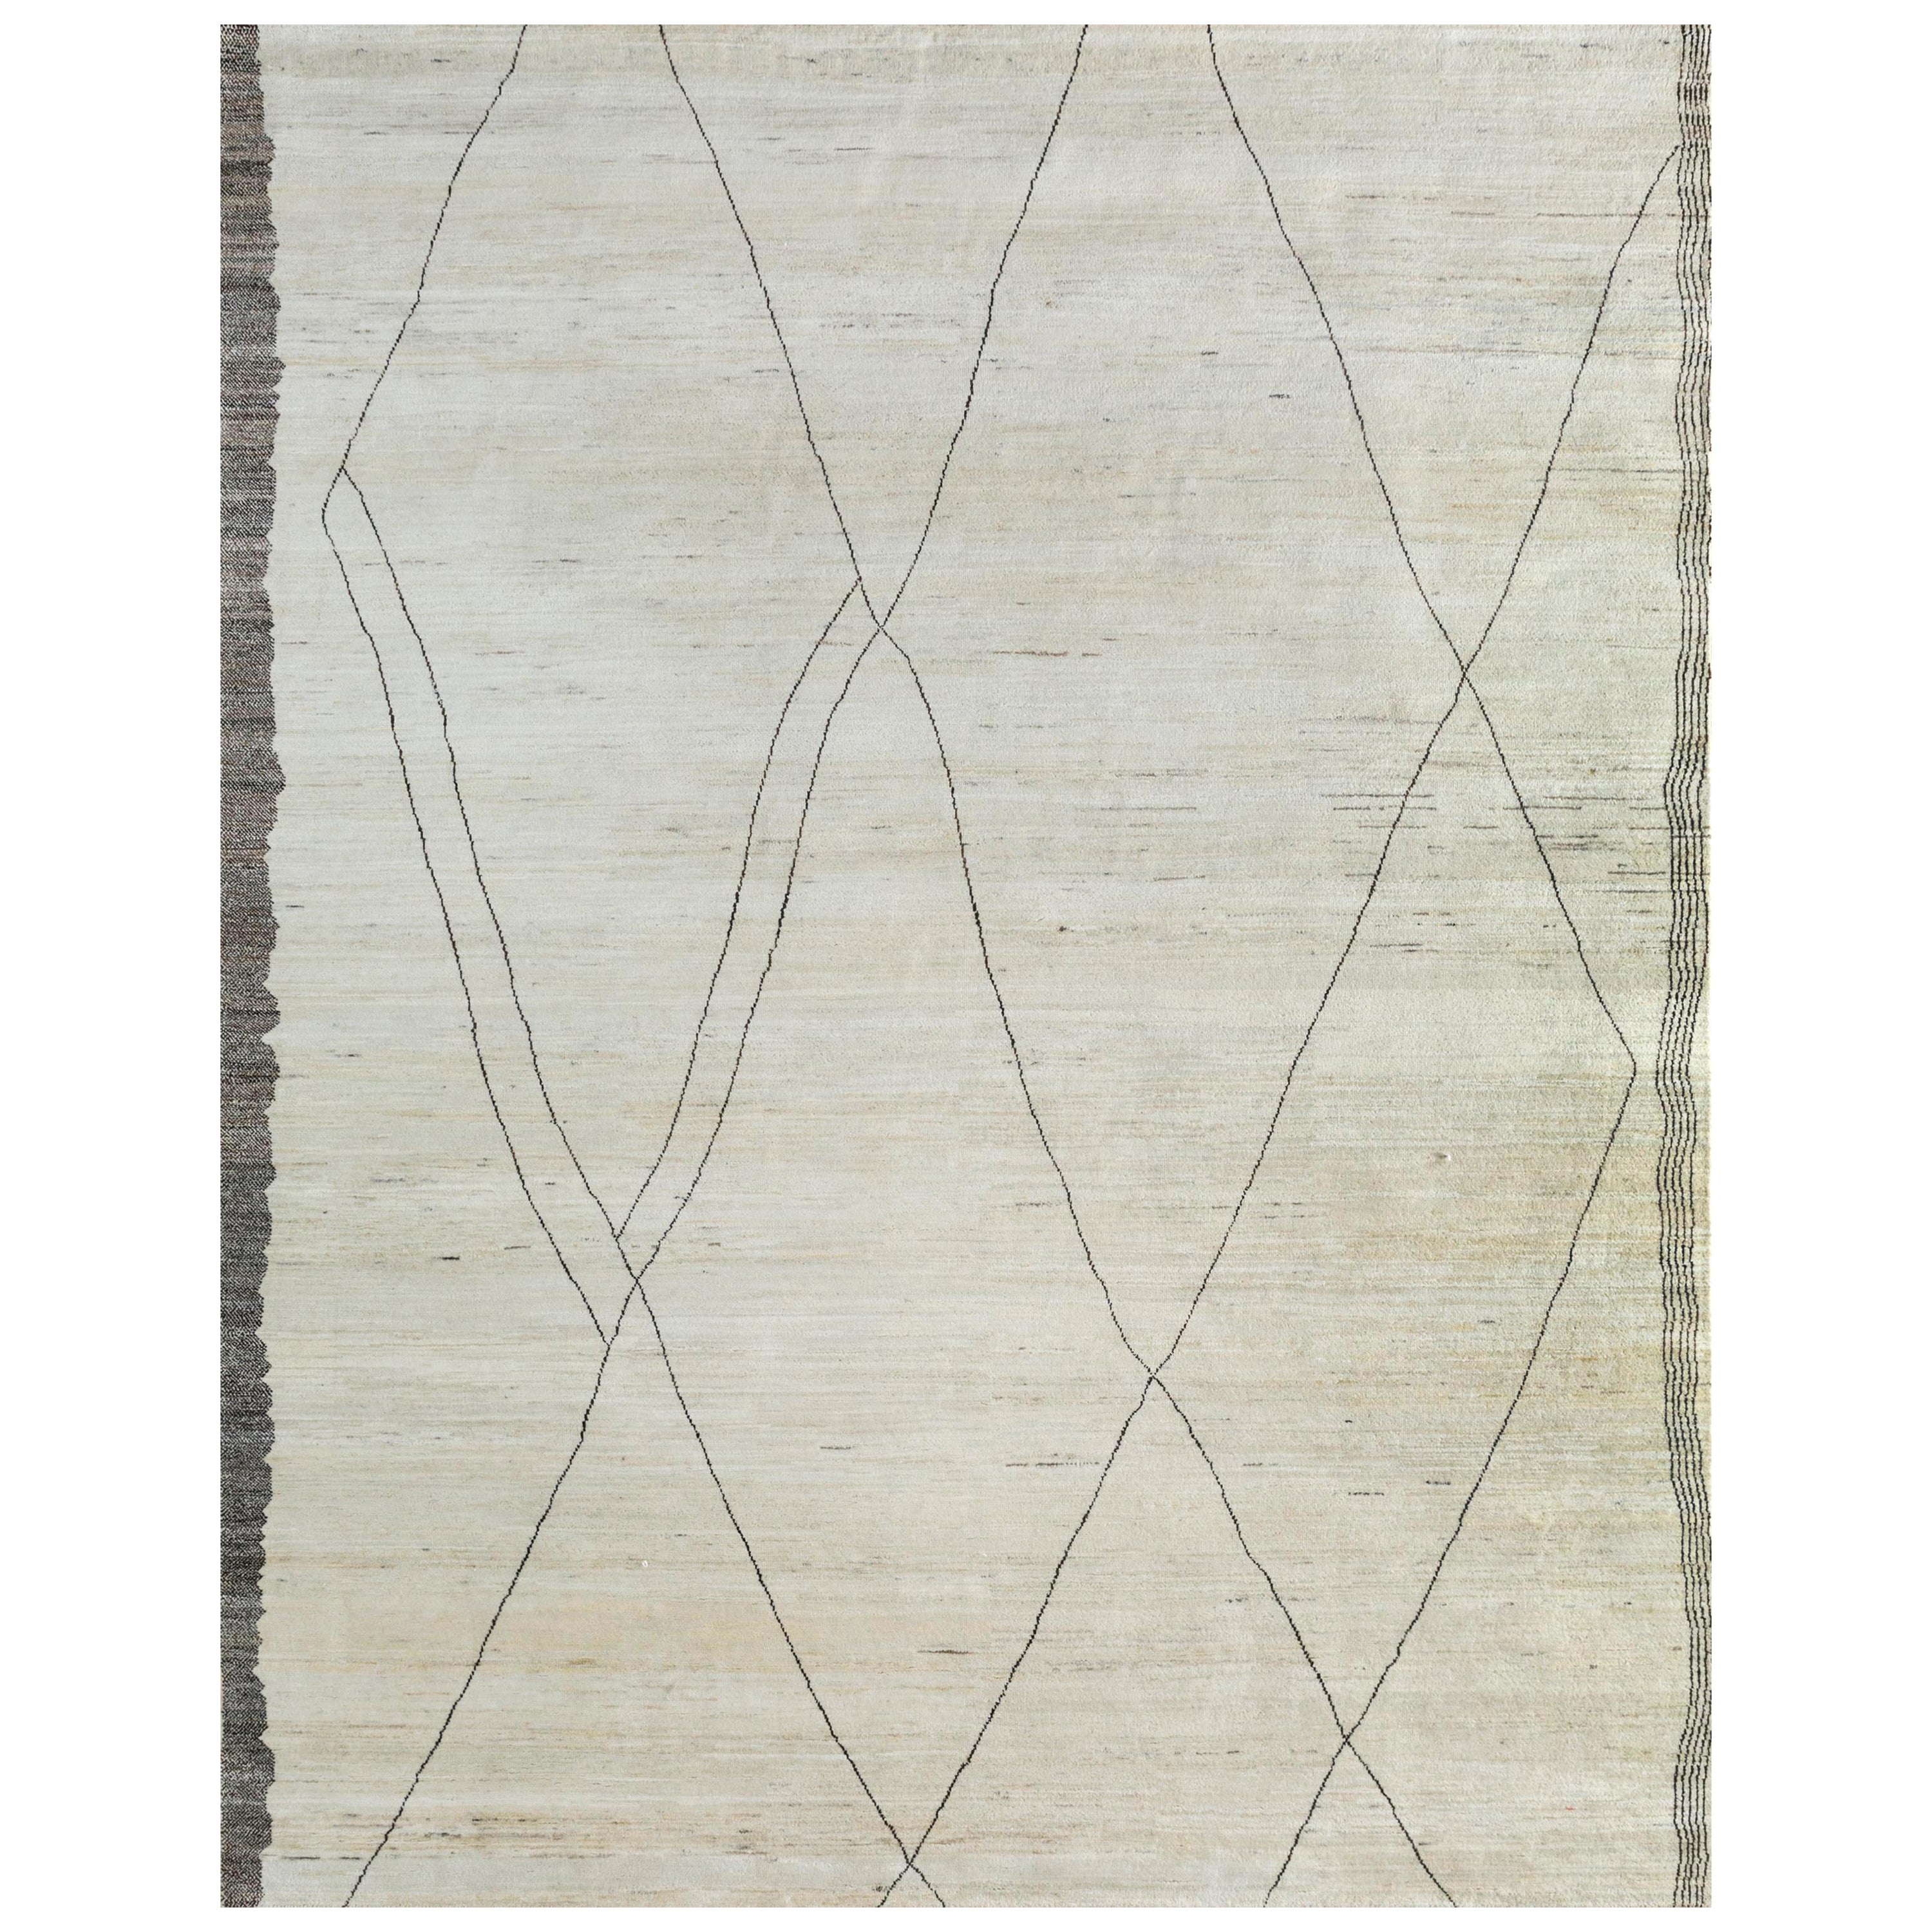 Moroccan Mosaic Natural White & Deep Espresso 300X420 cm Handknotted Rug For Sale